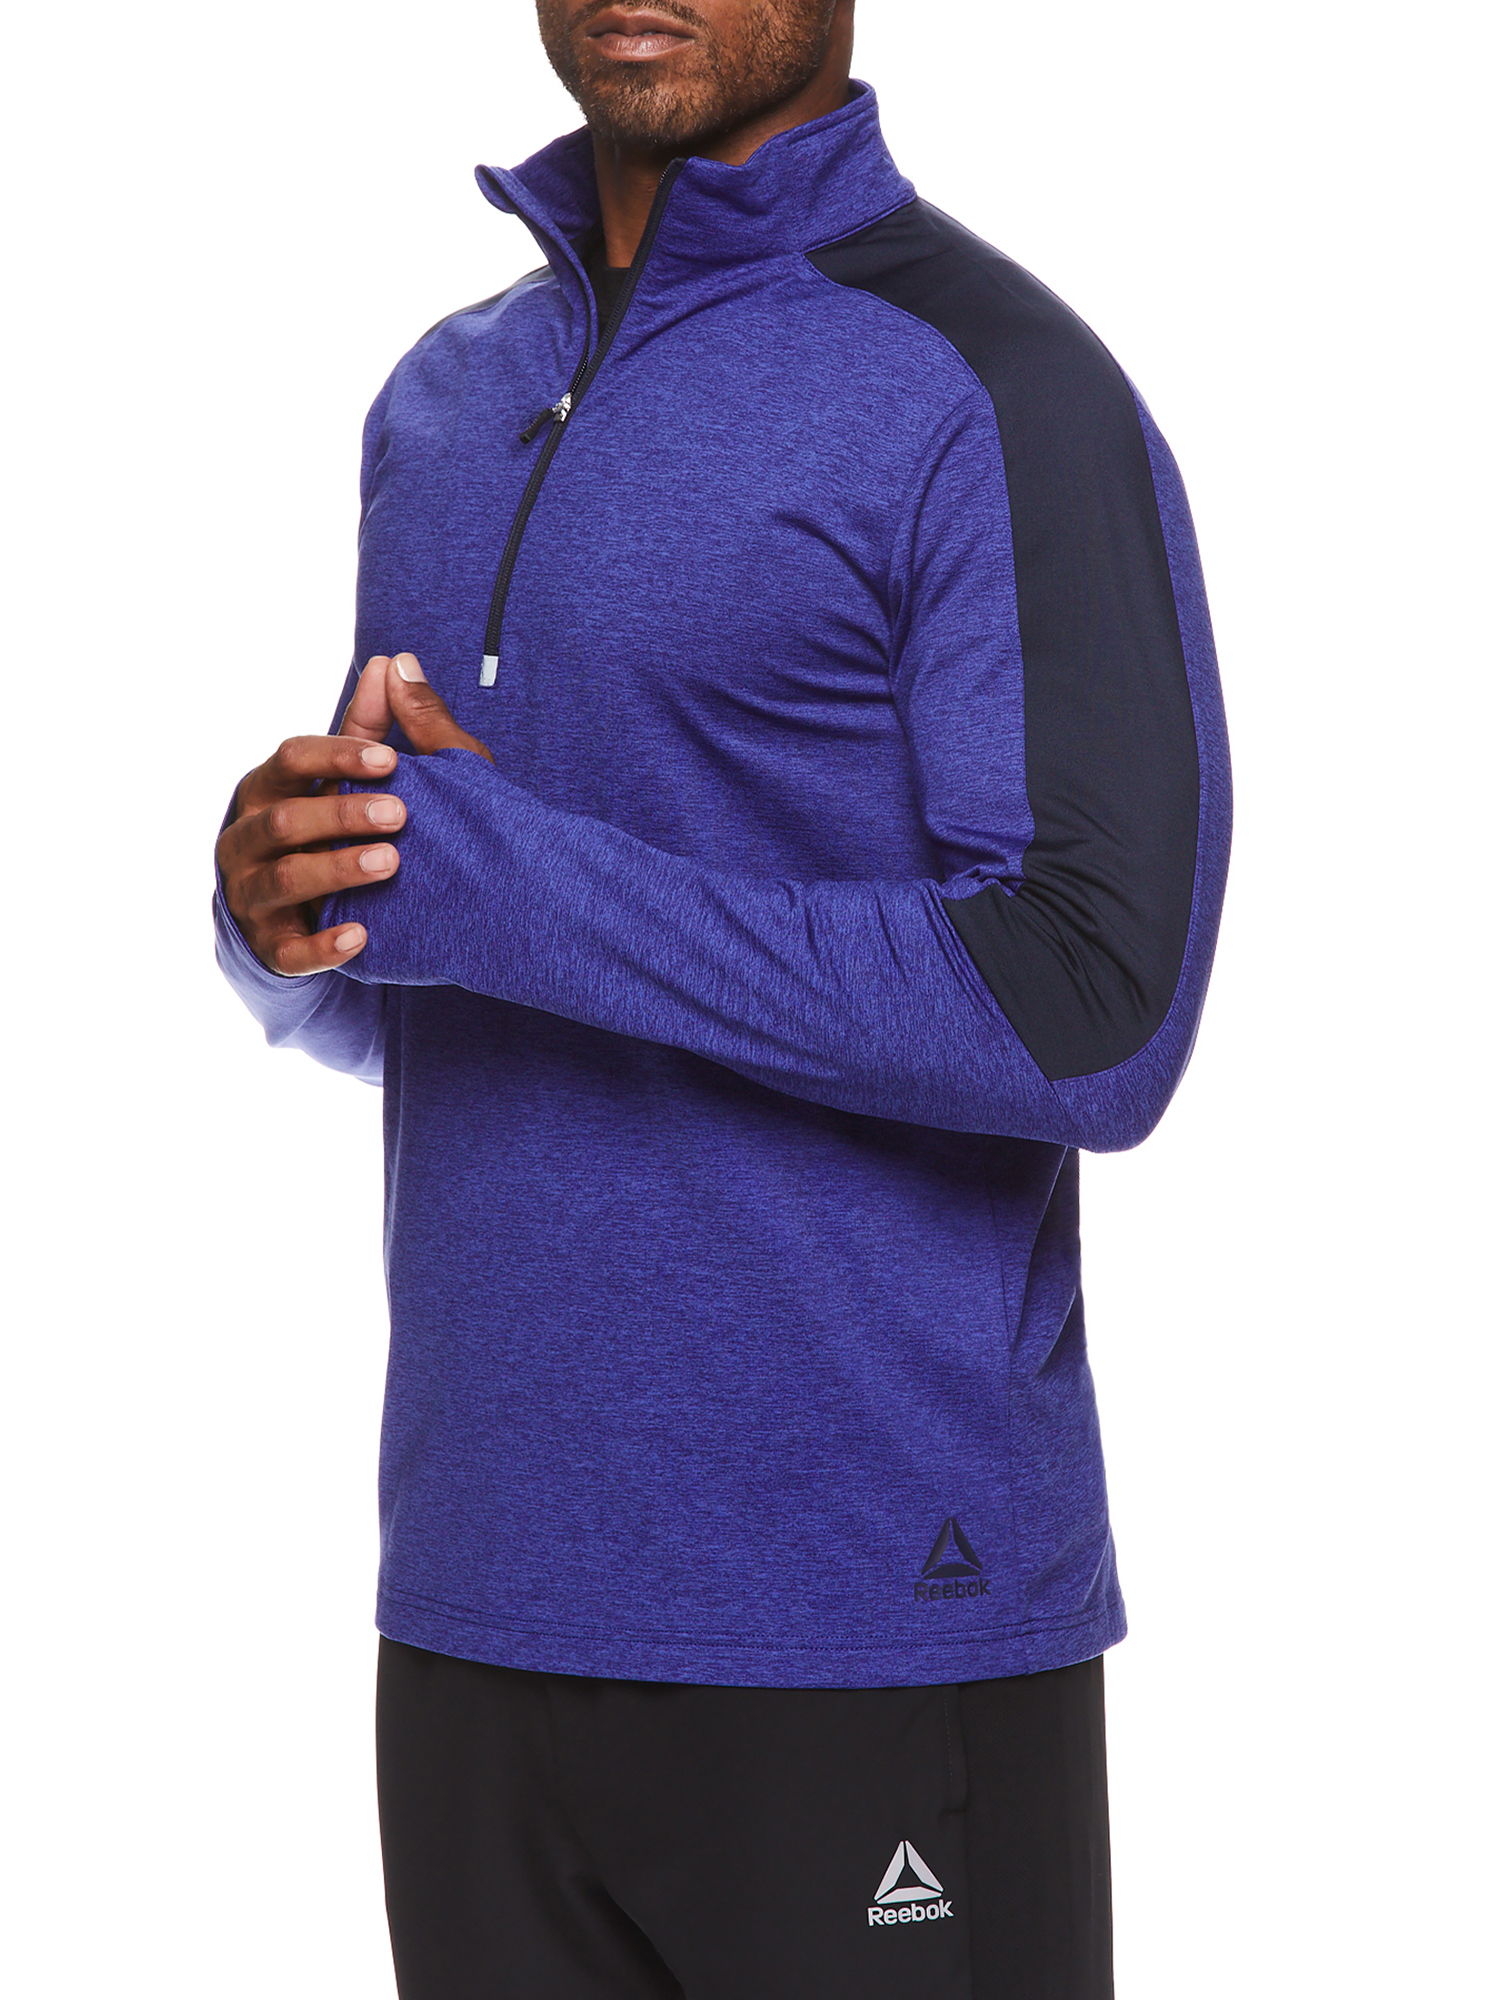 Reebok Men's and Big Men's Active Break-Fast Qtr Zip Mock Pullover, up to Size 3XL - image 4 of 4